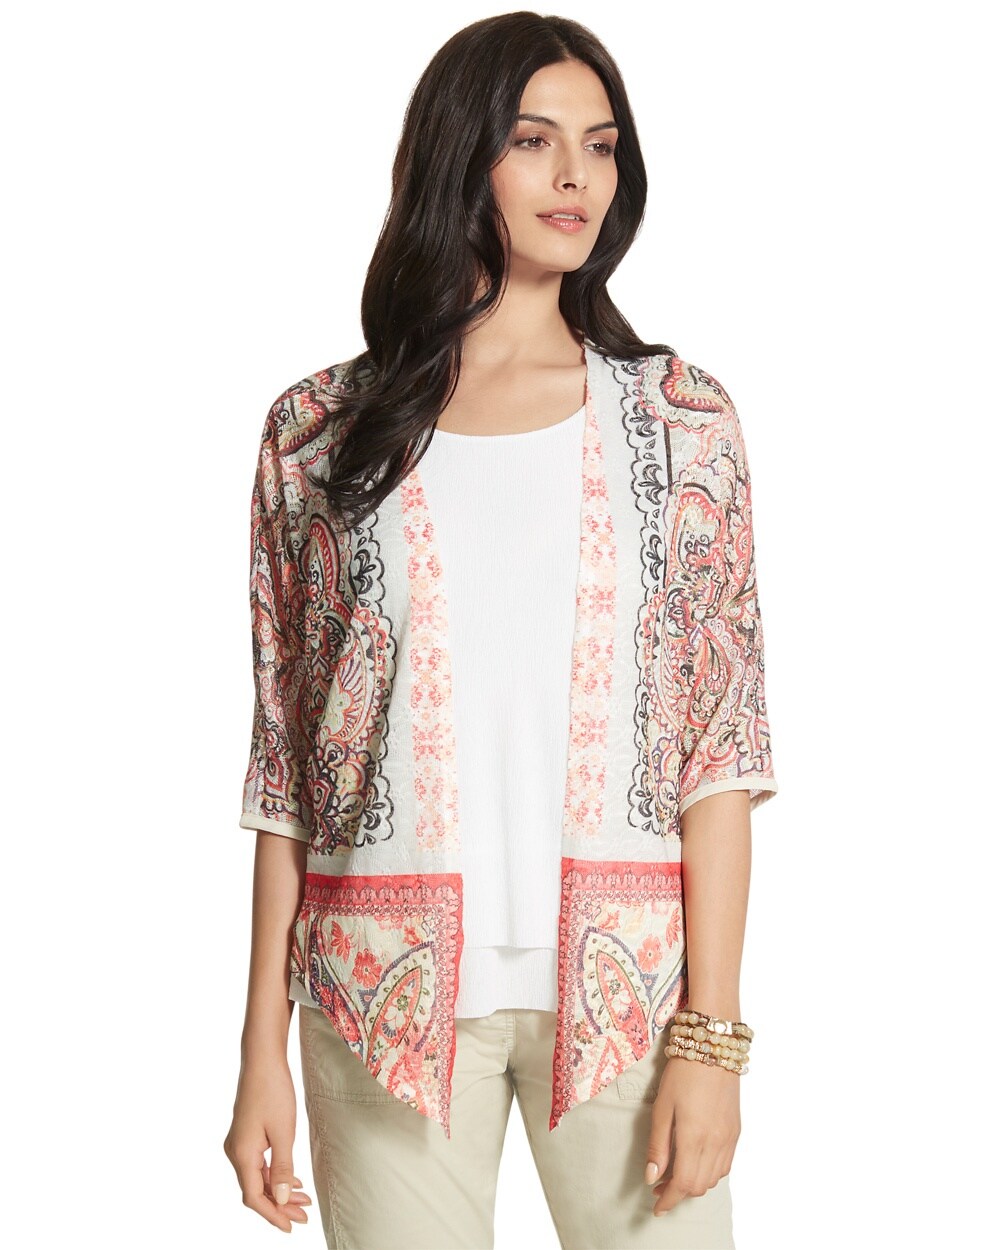 Woven Mix Margarite Cardigan - Women's New Clothing - Tops, Bottoms ...